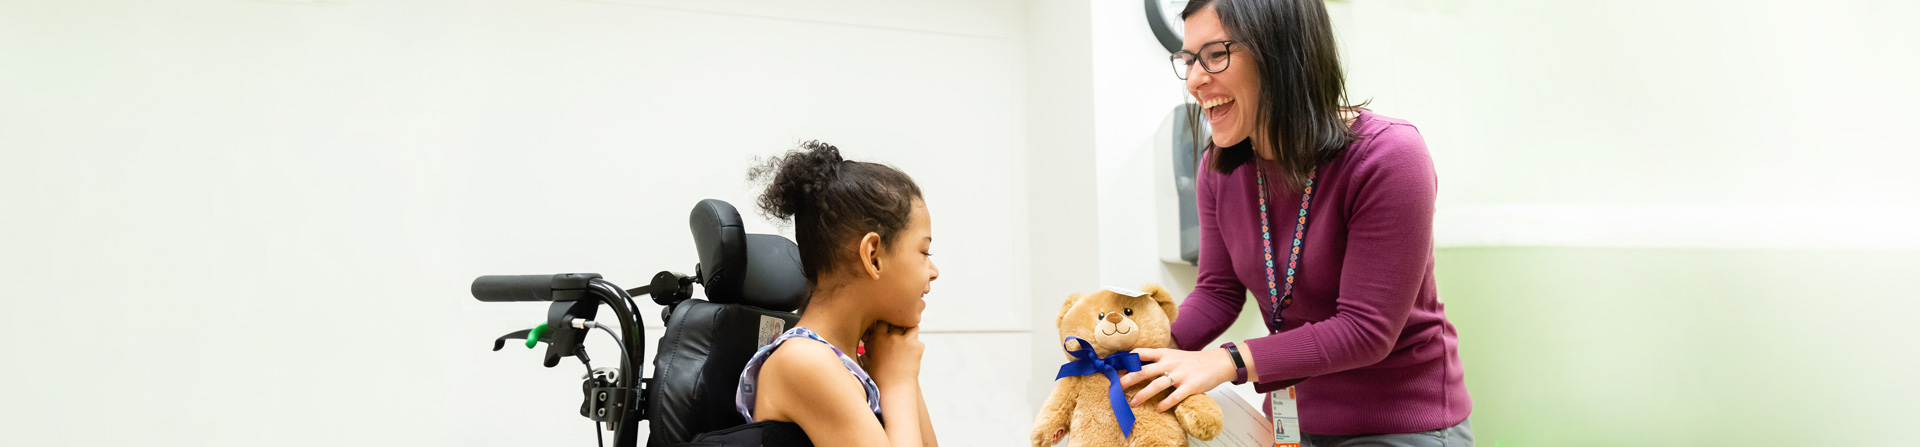 A healthcare provider hands a teddy bear to a young girl in a wheelchair